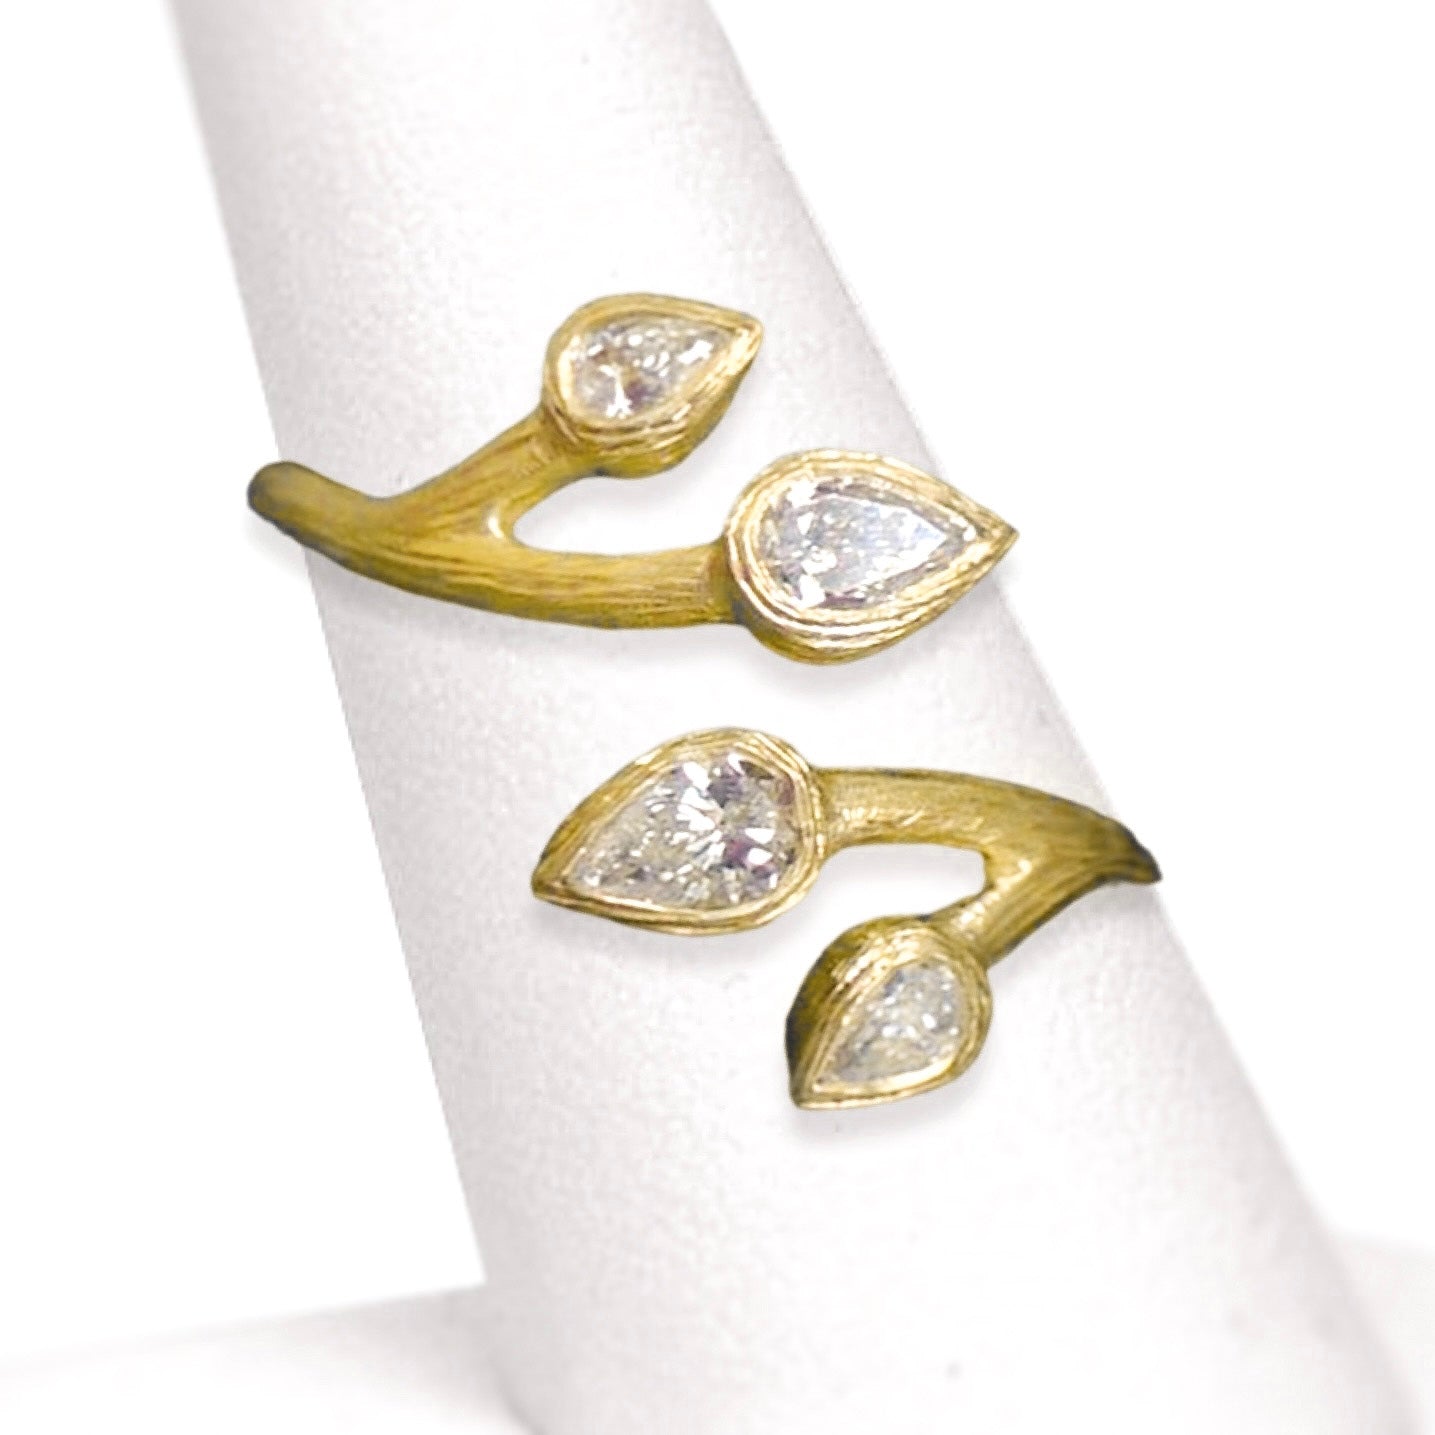 Pear Diamond Wrap Ring by Laurie Kaiser available at Talisman Collection Fine Jewelers in El Dorado Hills, CA and online. 0.31 carats of pear-cut diamonds sit like buds on an 18k yellow gold branch that wraps around your finger. This modern organic design makes an excellent choice for an alternative wedding band or right hand ring. Its fresh beauty will be treasured for years to come.